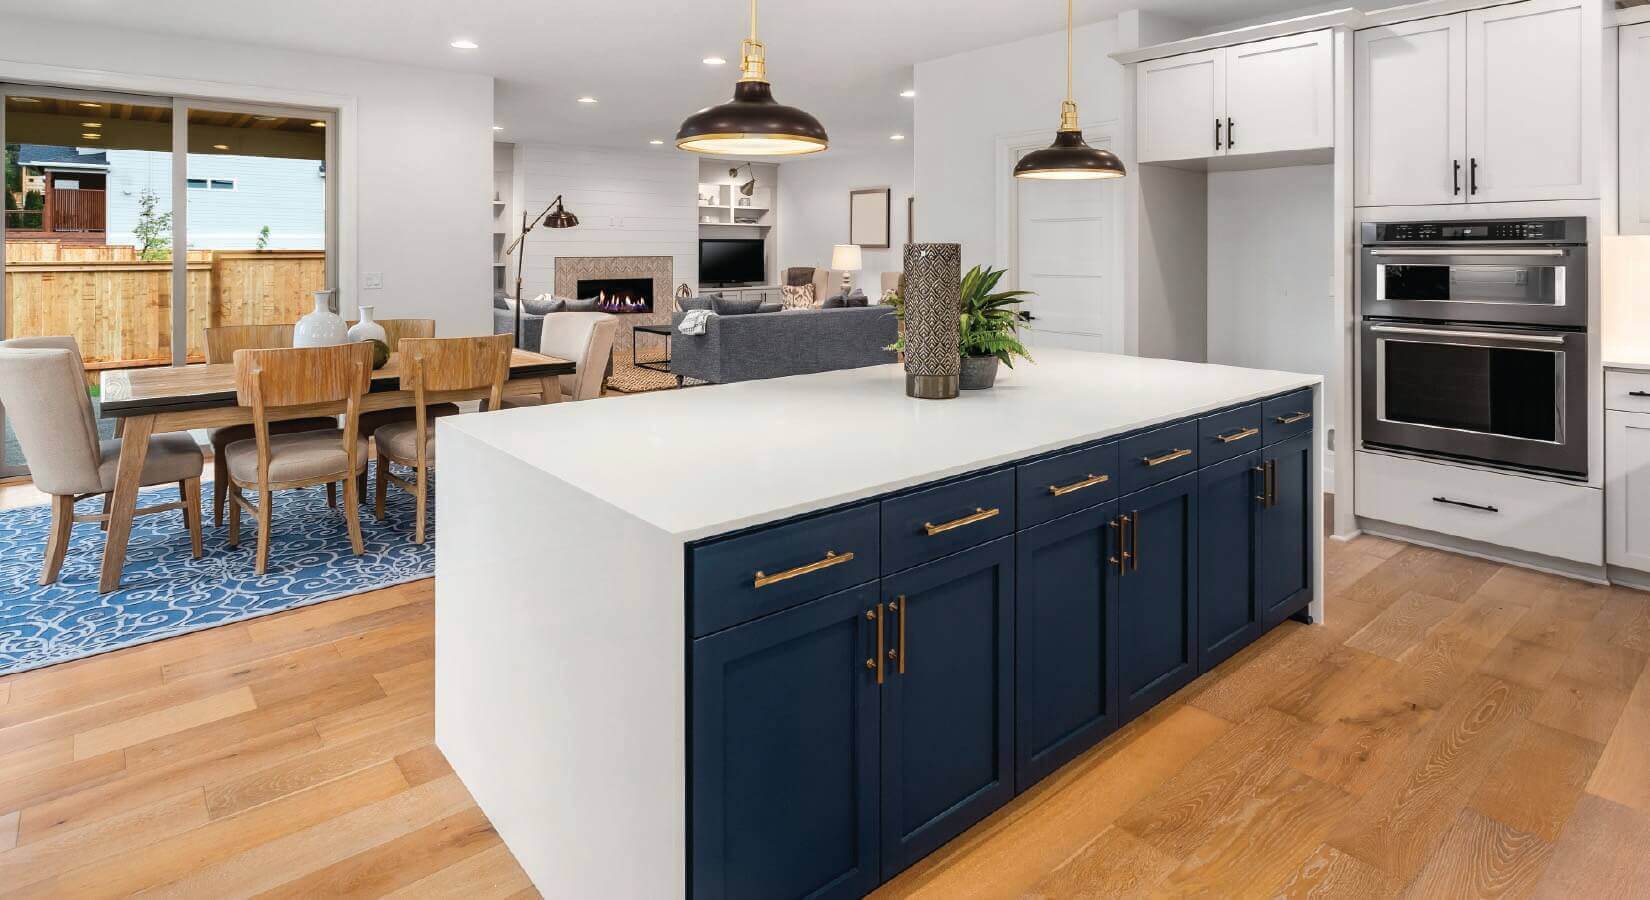 Kitchen island with white waterfall countertop and navy blue cabinets with gold hardware on light wood floor.